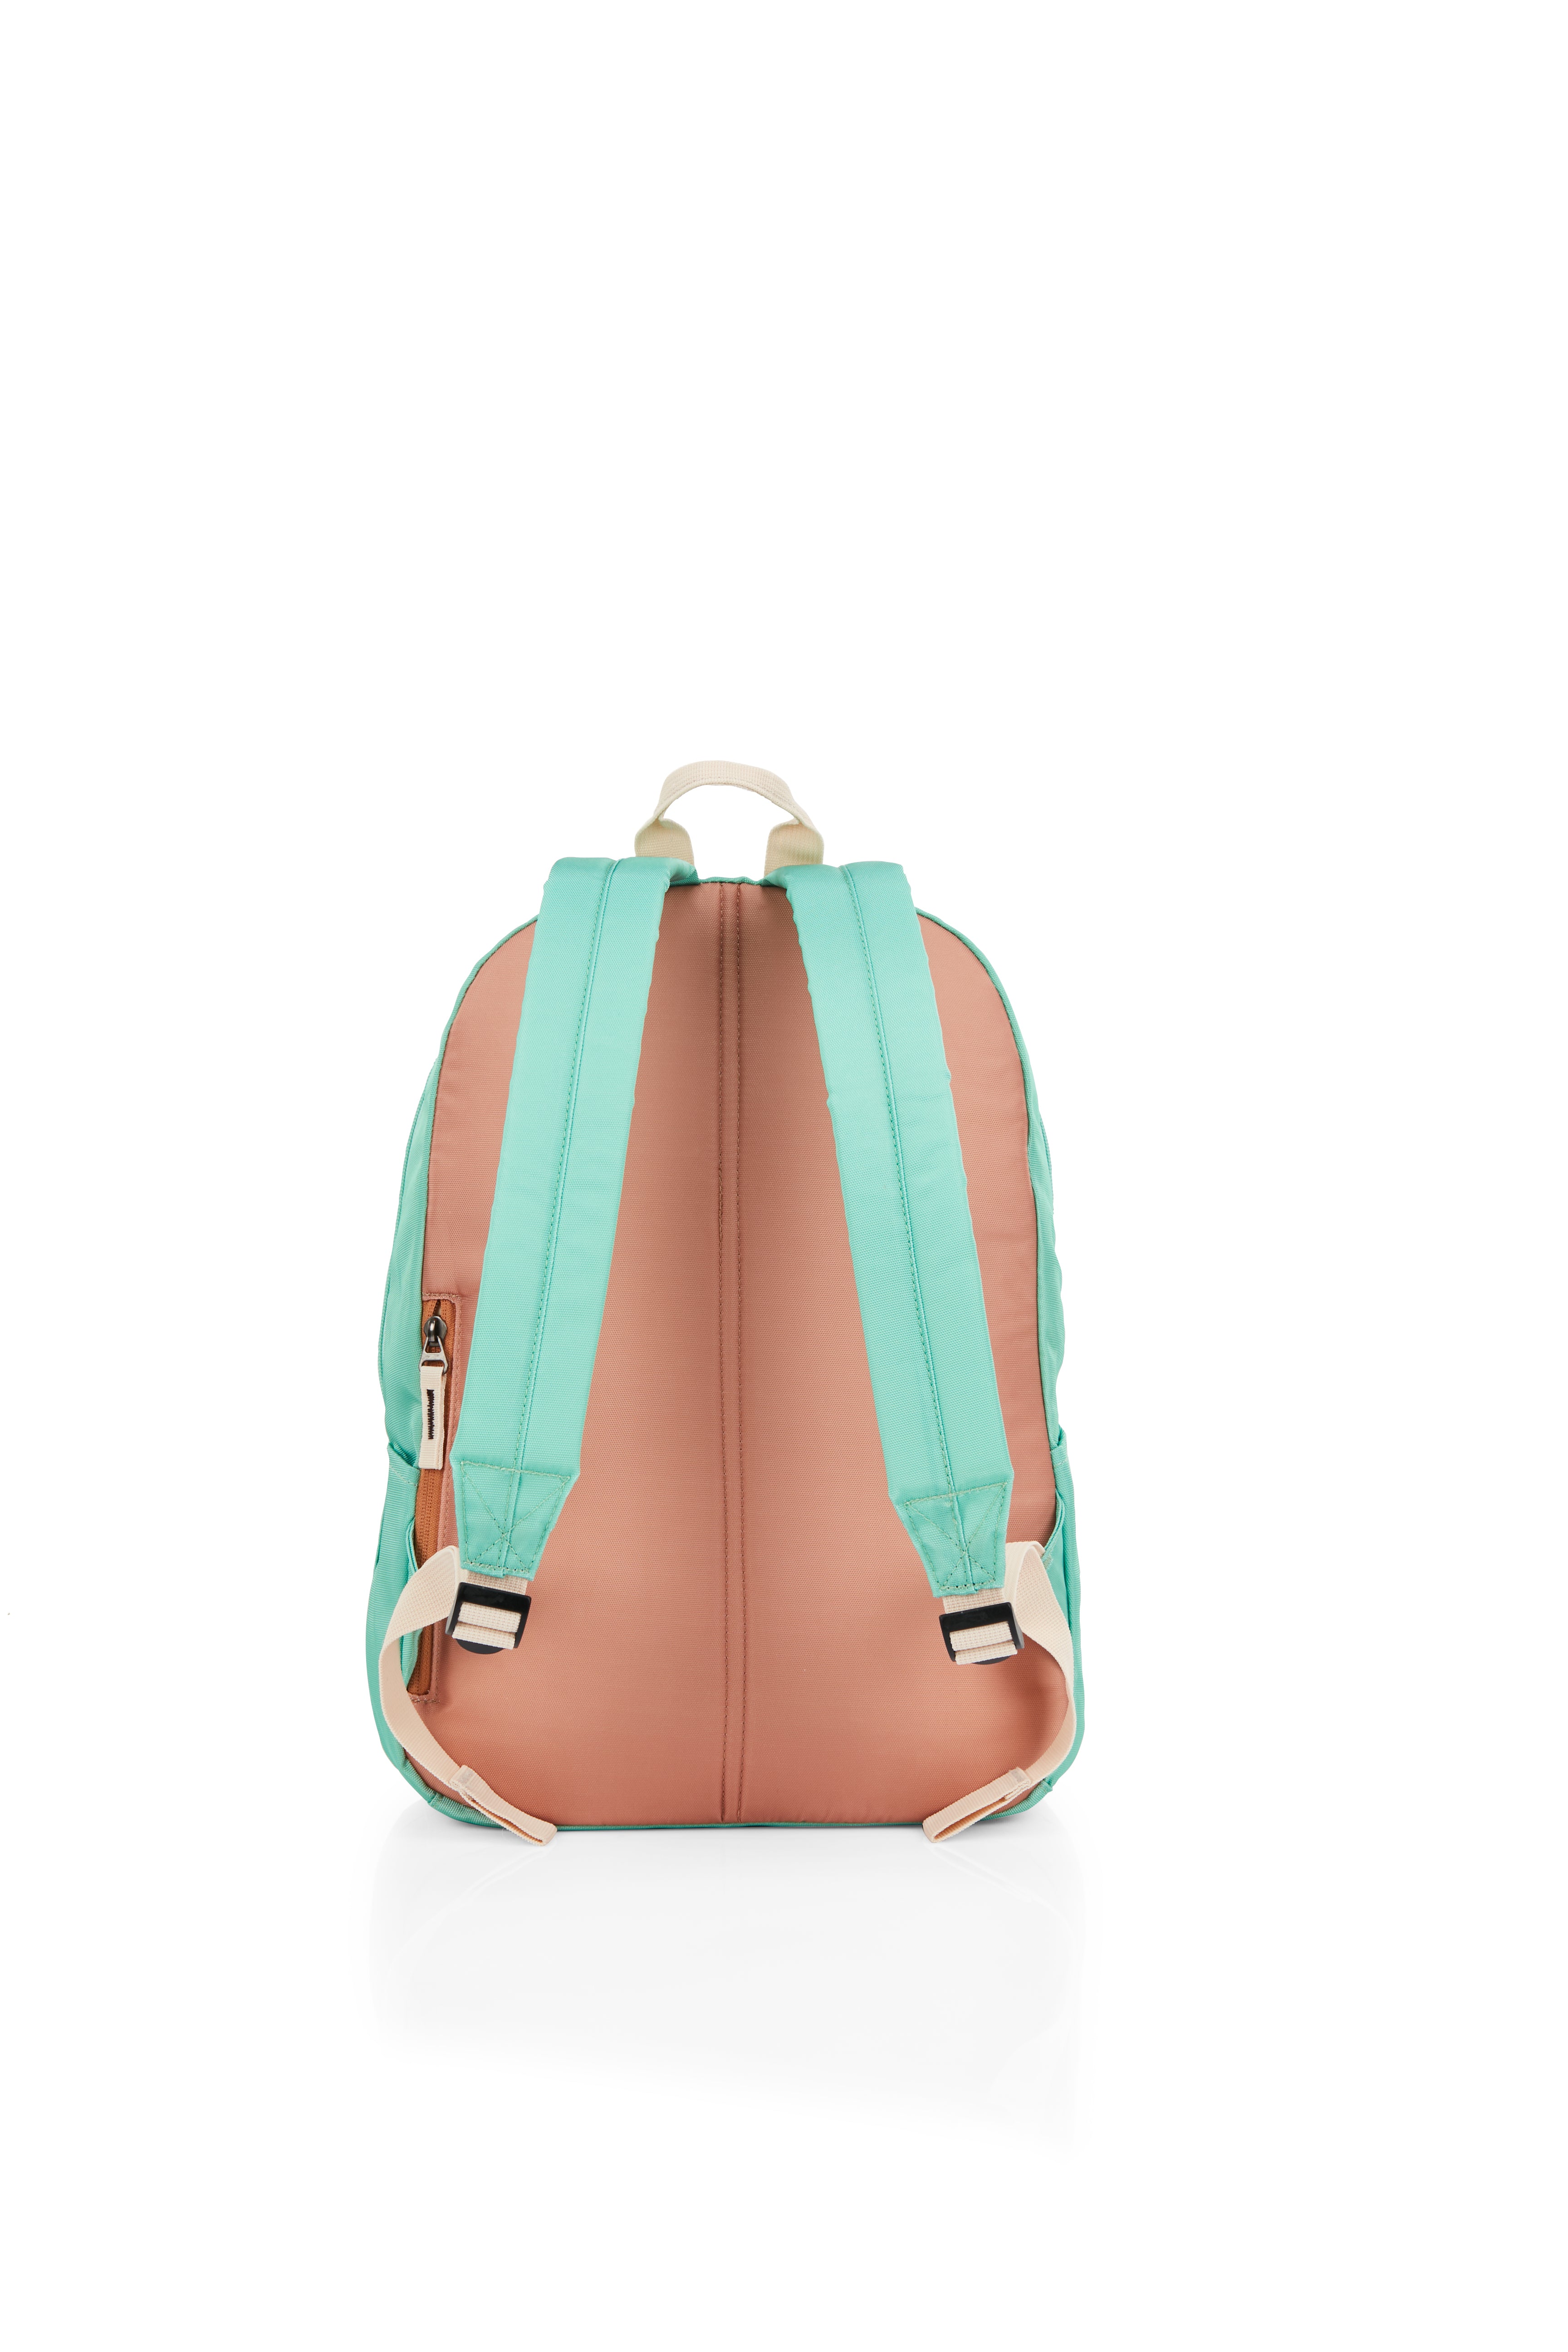 American Tourister - RUDY Small Fashion Backpack - Ice Mint-4